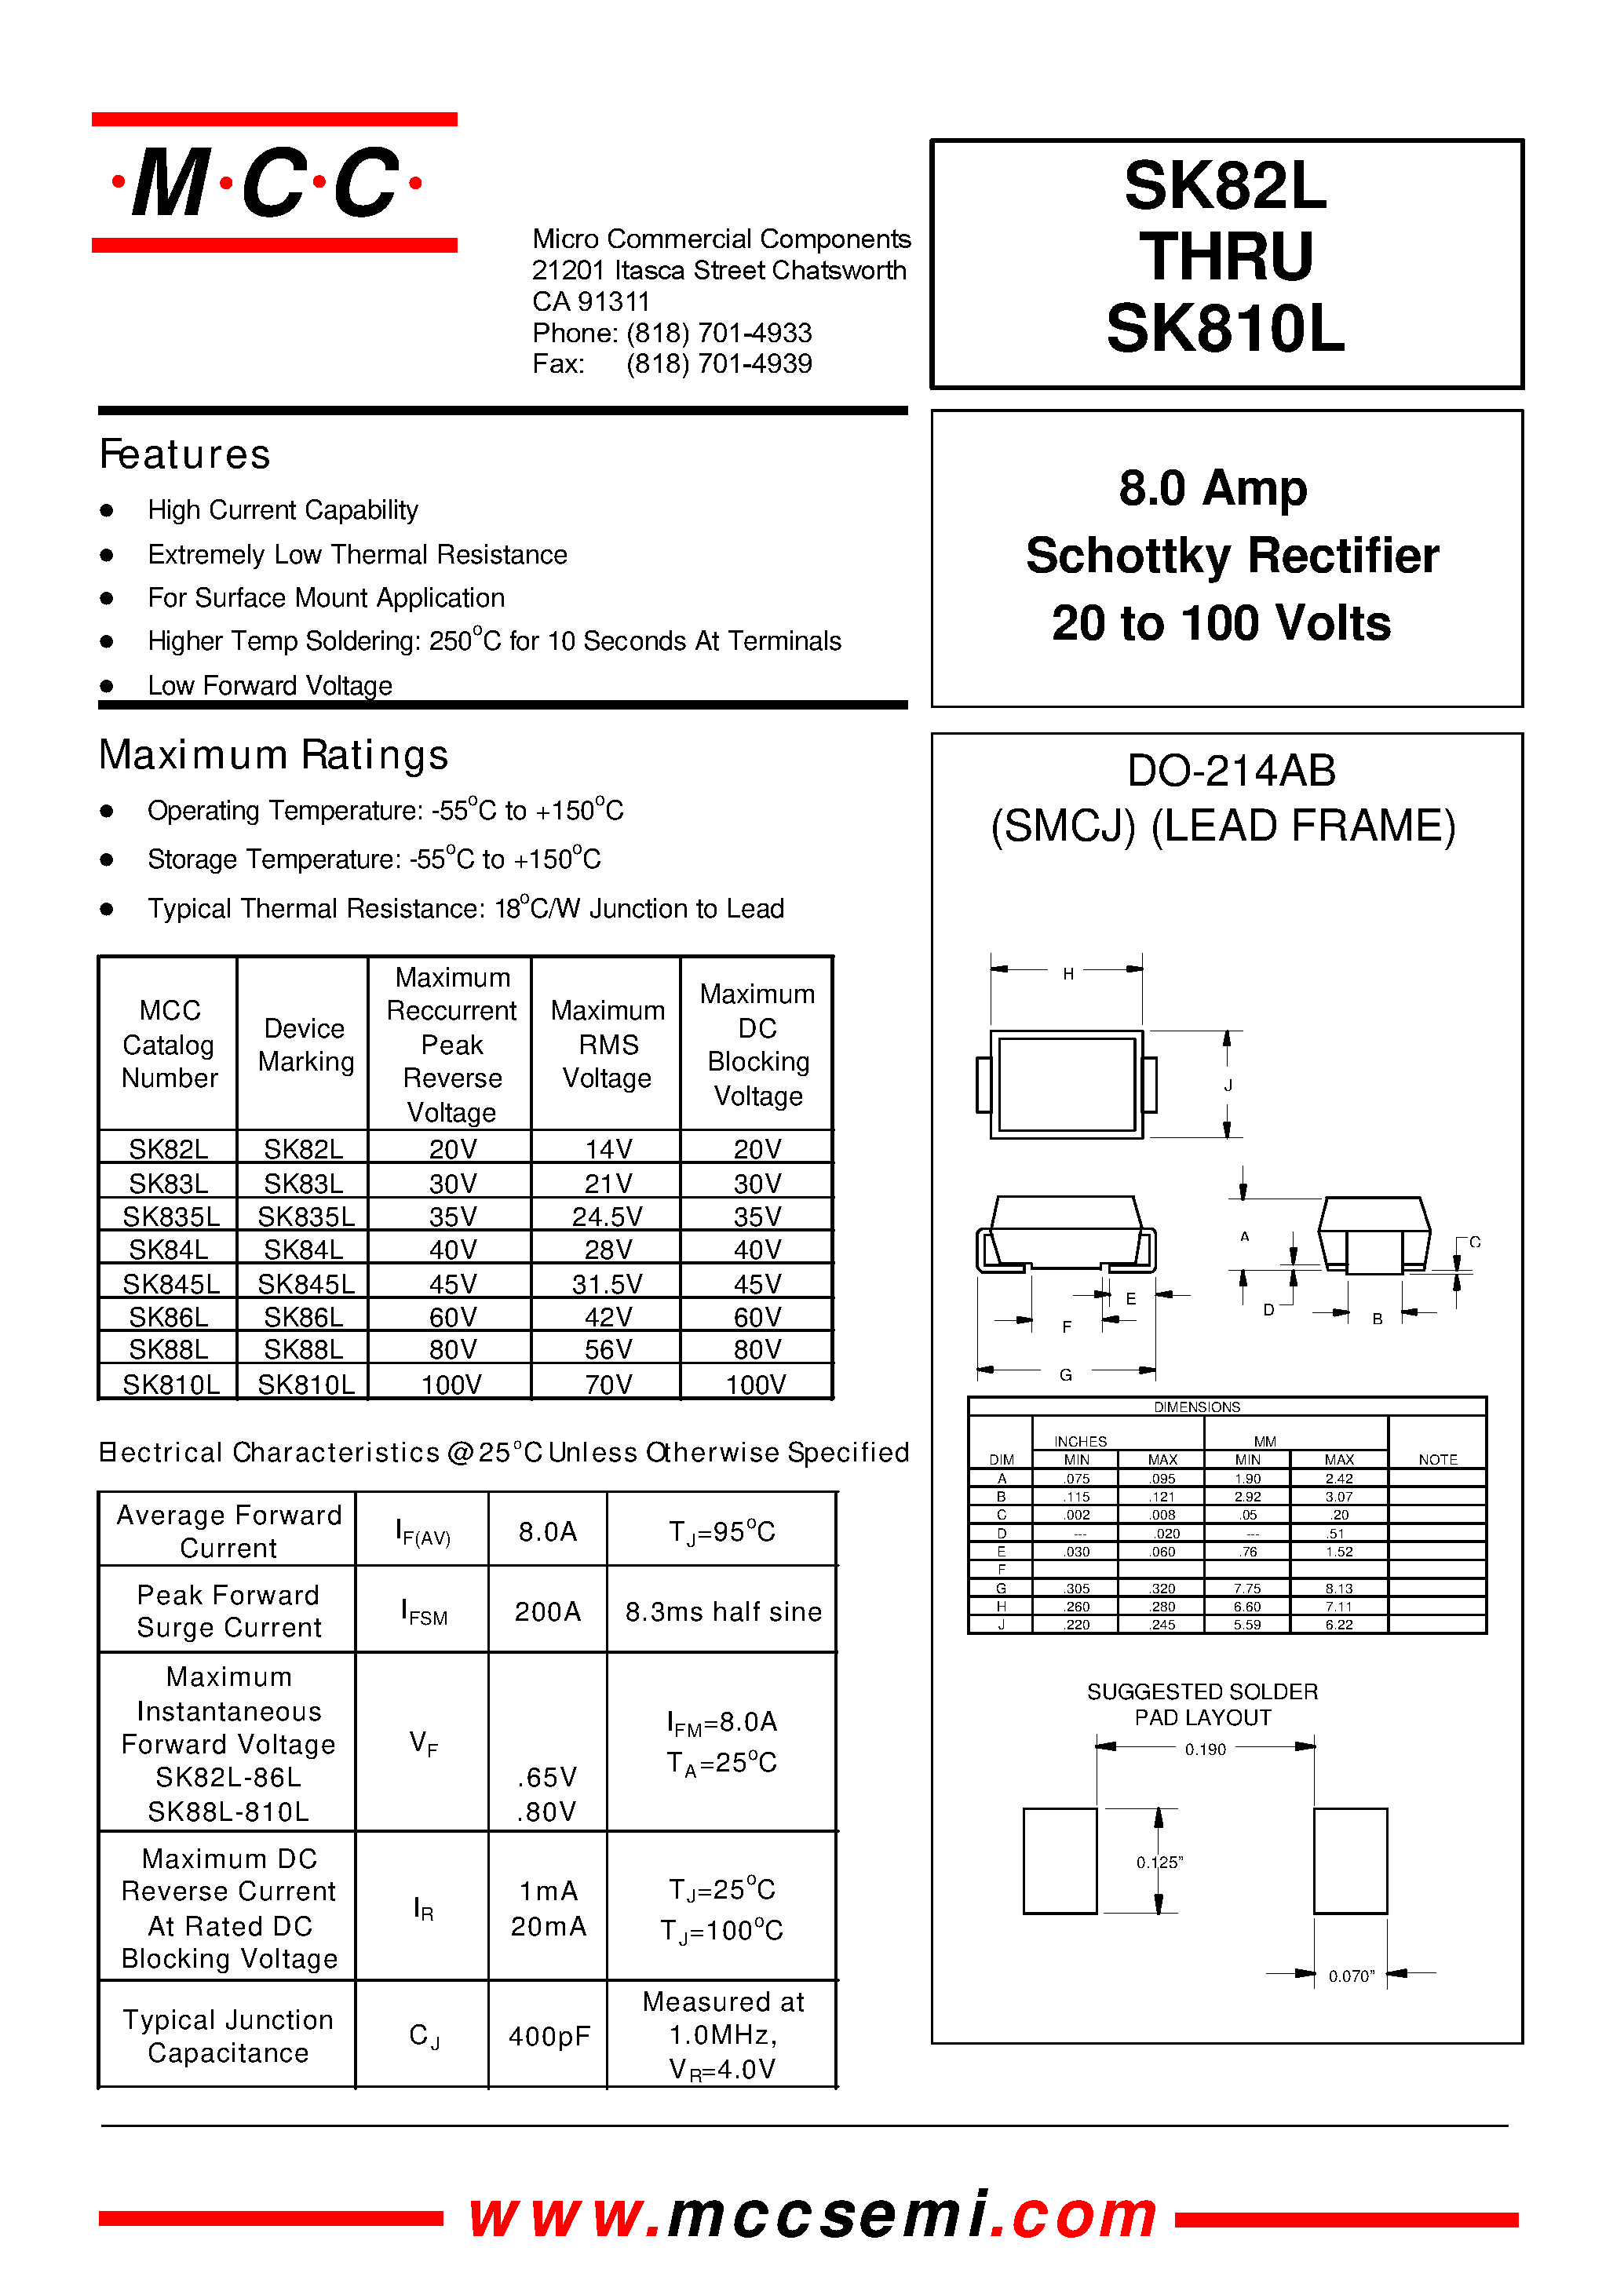 Datasheet SK86L - 8.0 Amp Schottky Rectifier 20 to 100 Volts page 1